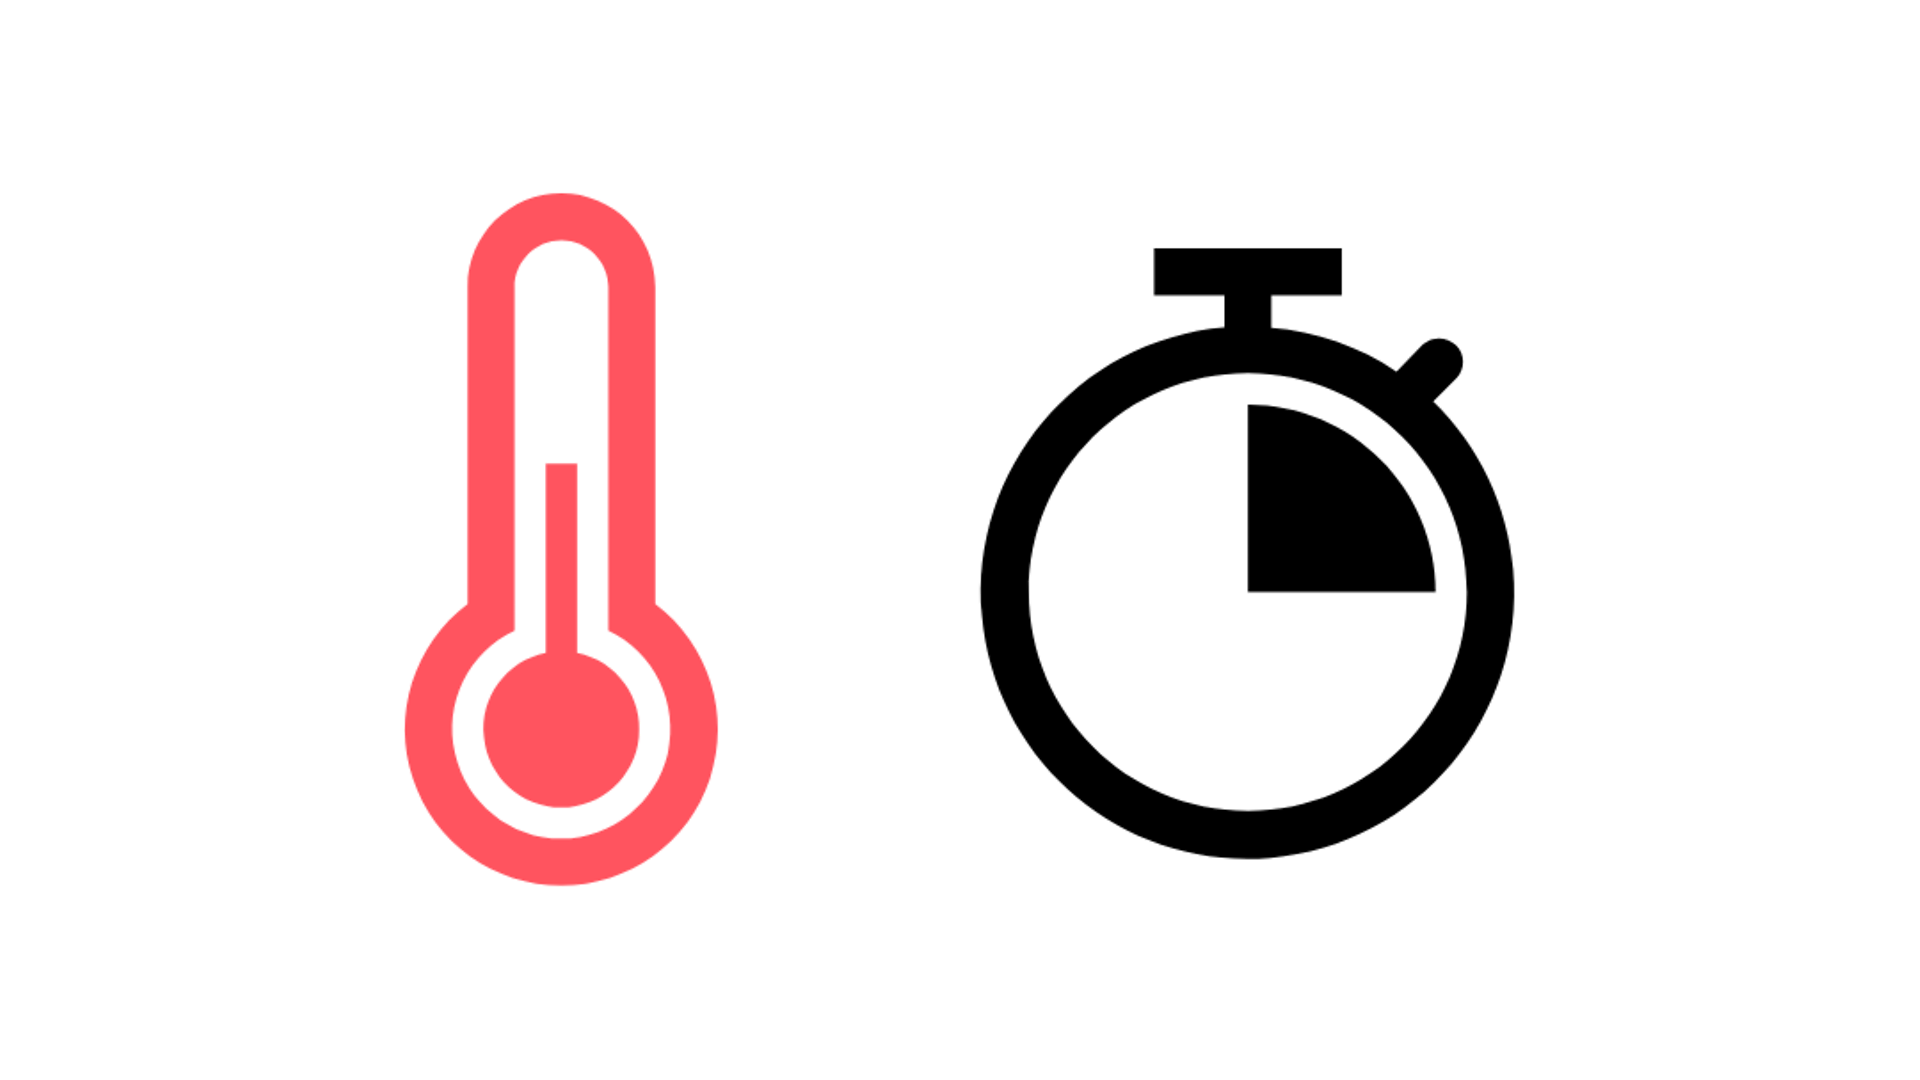 red symbol for thermometer and clock symbol, quater of an hour